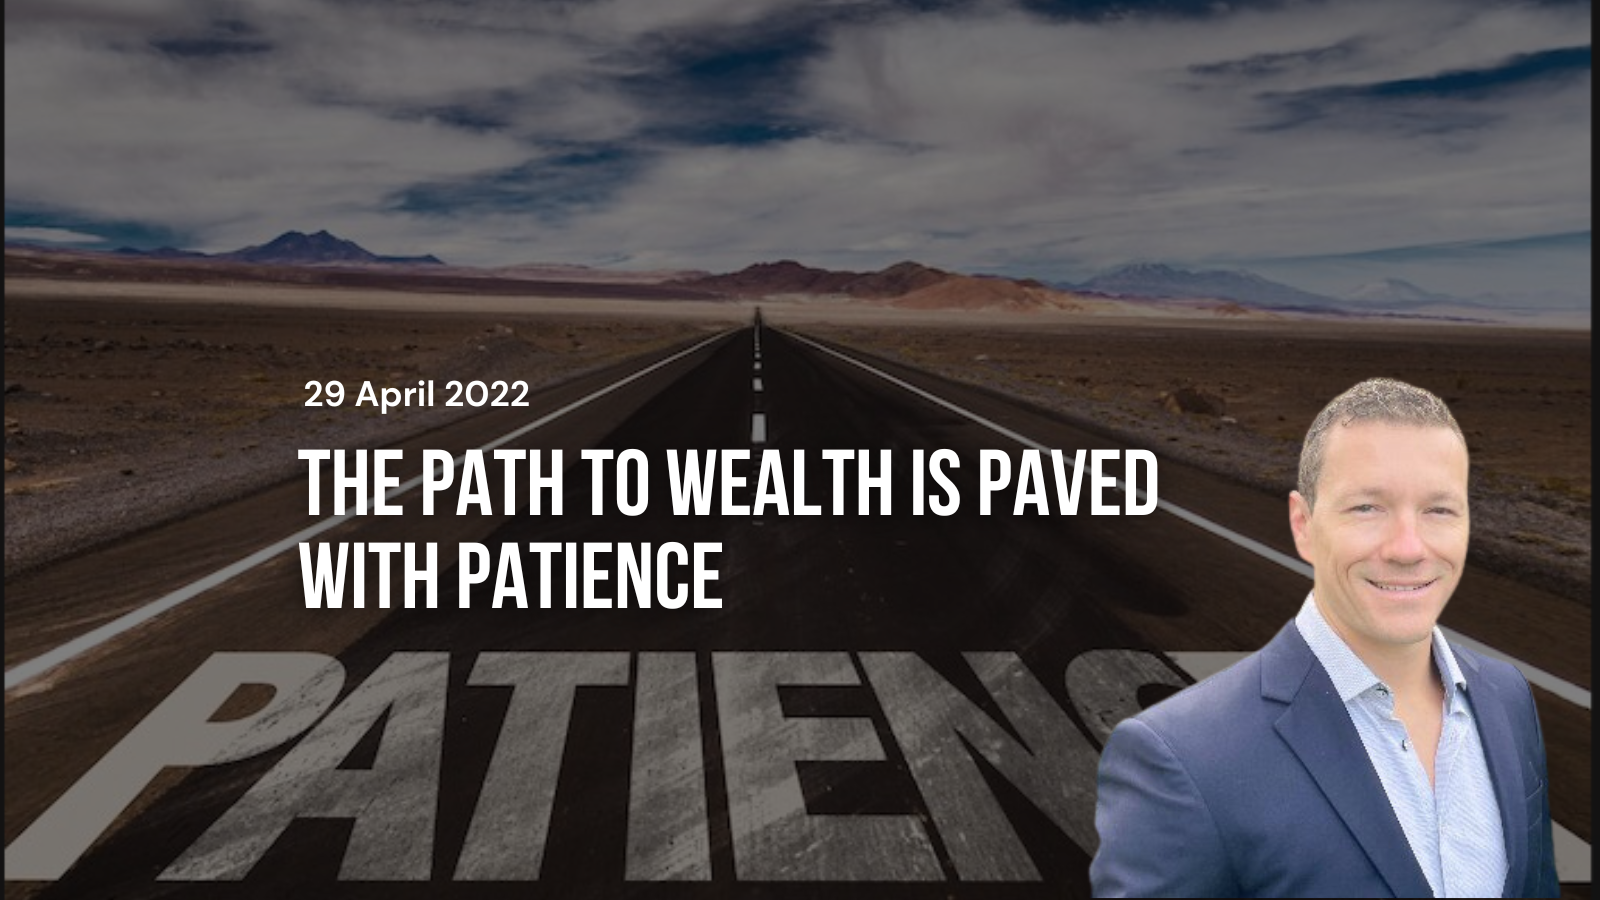 The path to wealth is paved with patience